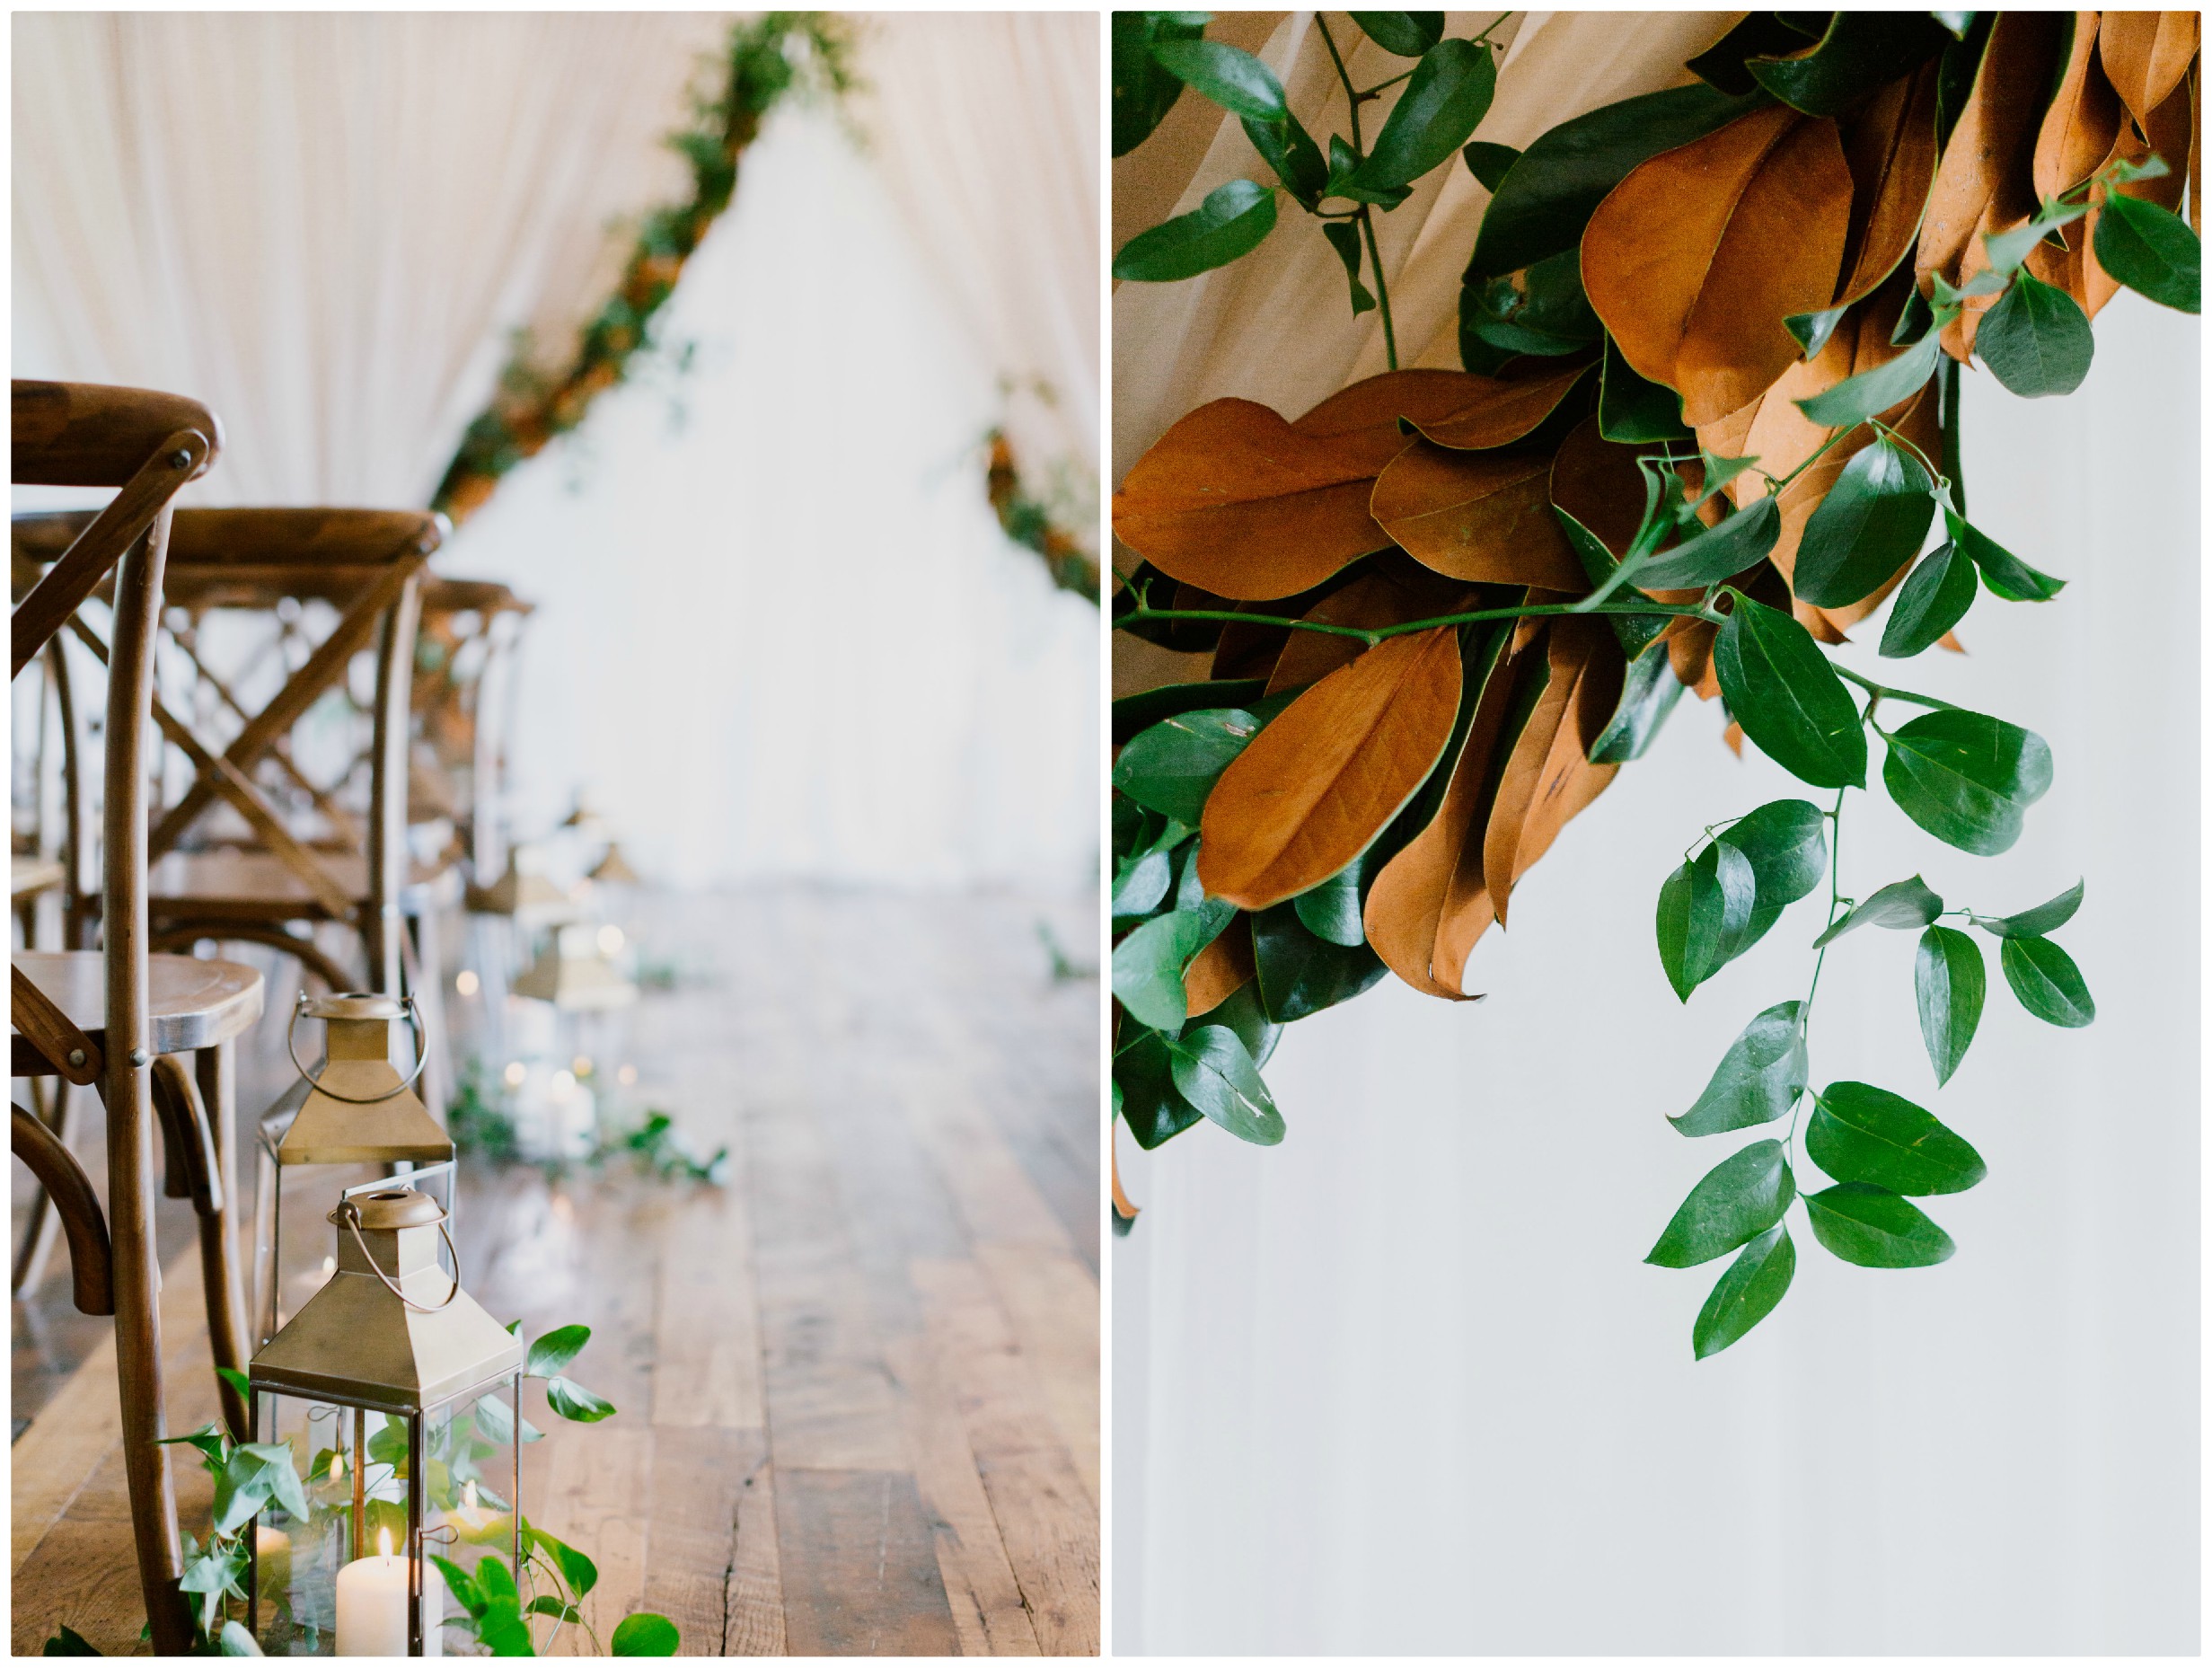 Magnolia Leaves Wedding | The Day's Design | Katie Grace Photography